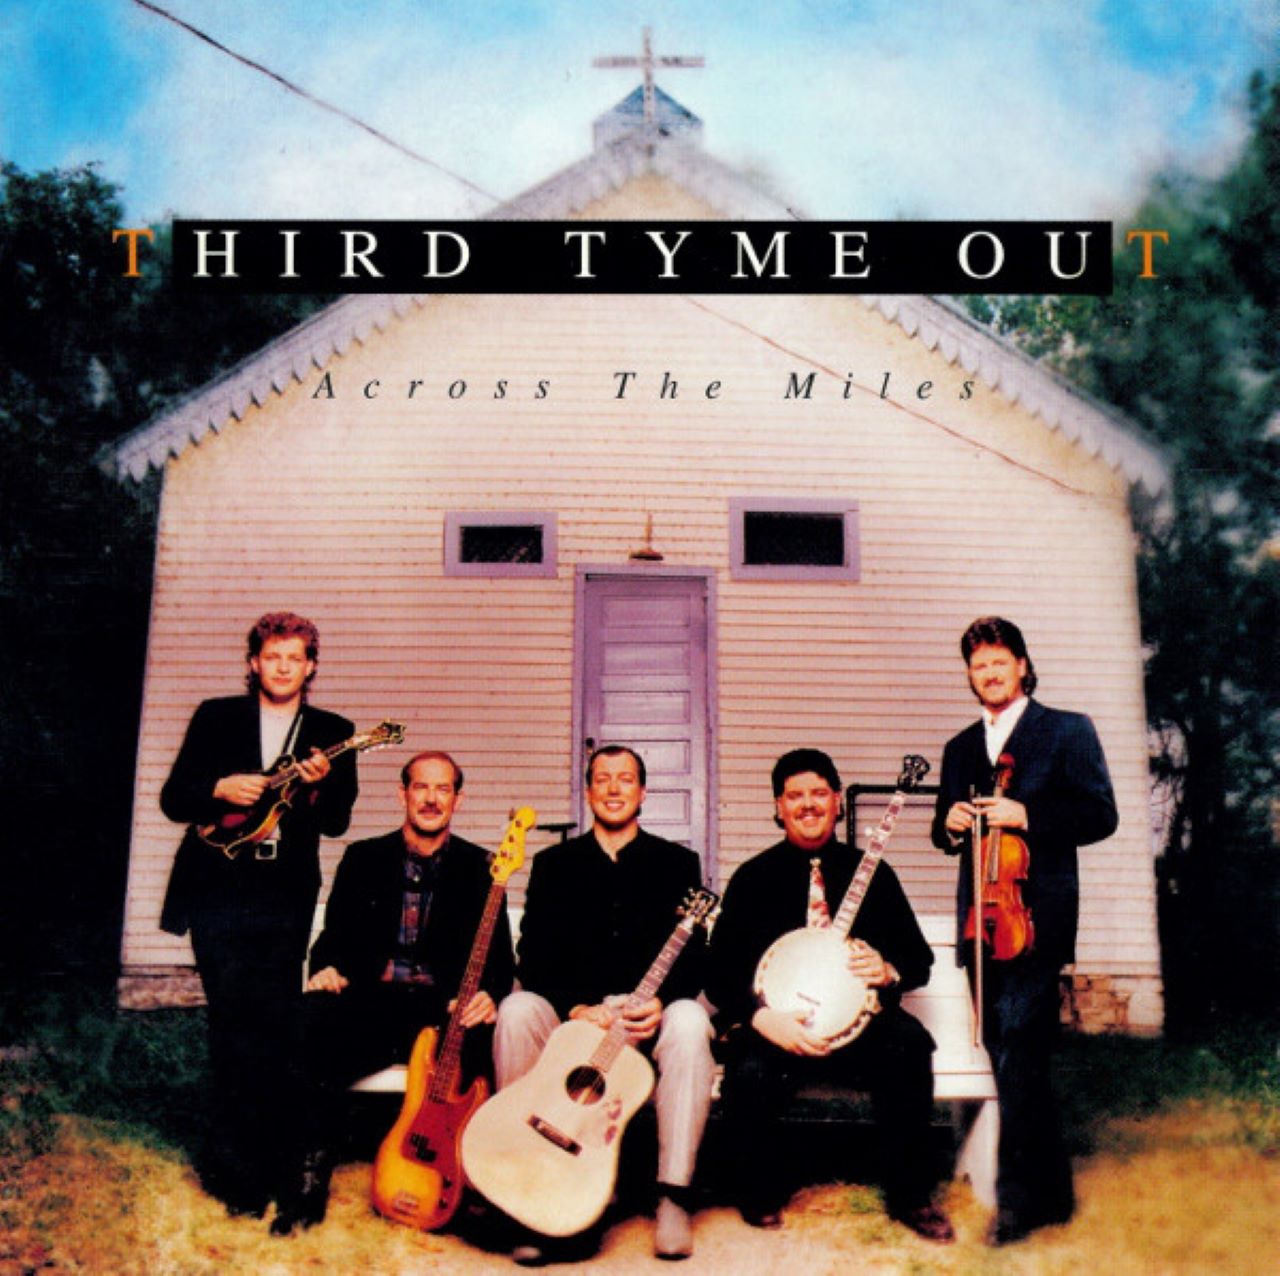 IIIrd Tyme Out - Across The Miles cover album